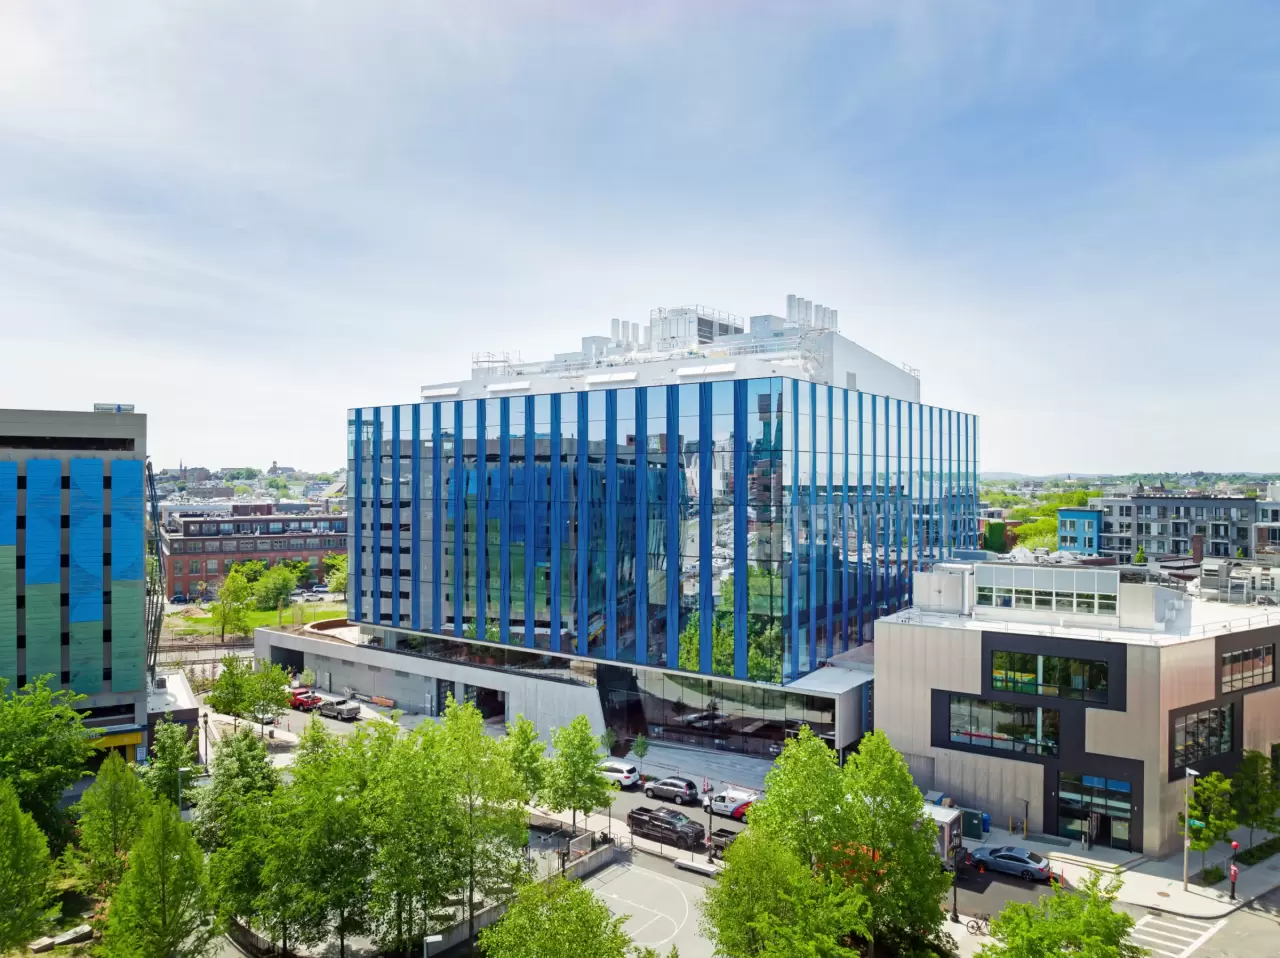 Breakthrough Properties Welcomes CRISPR Therapeutics to the Company's Newly-Completed R&D Headquarters in Boston img#1